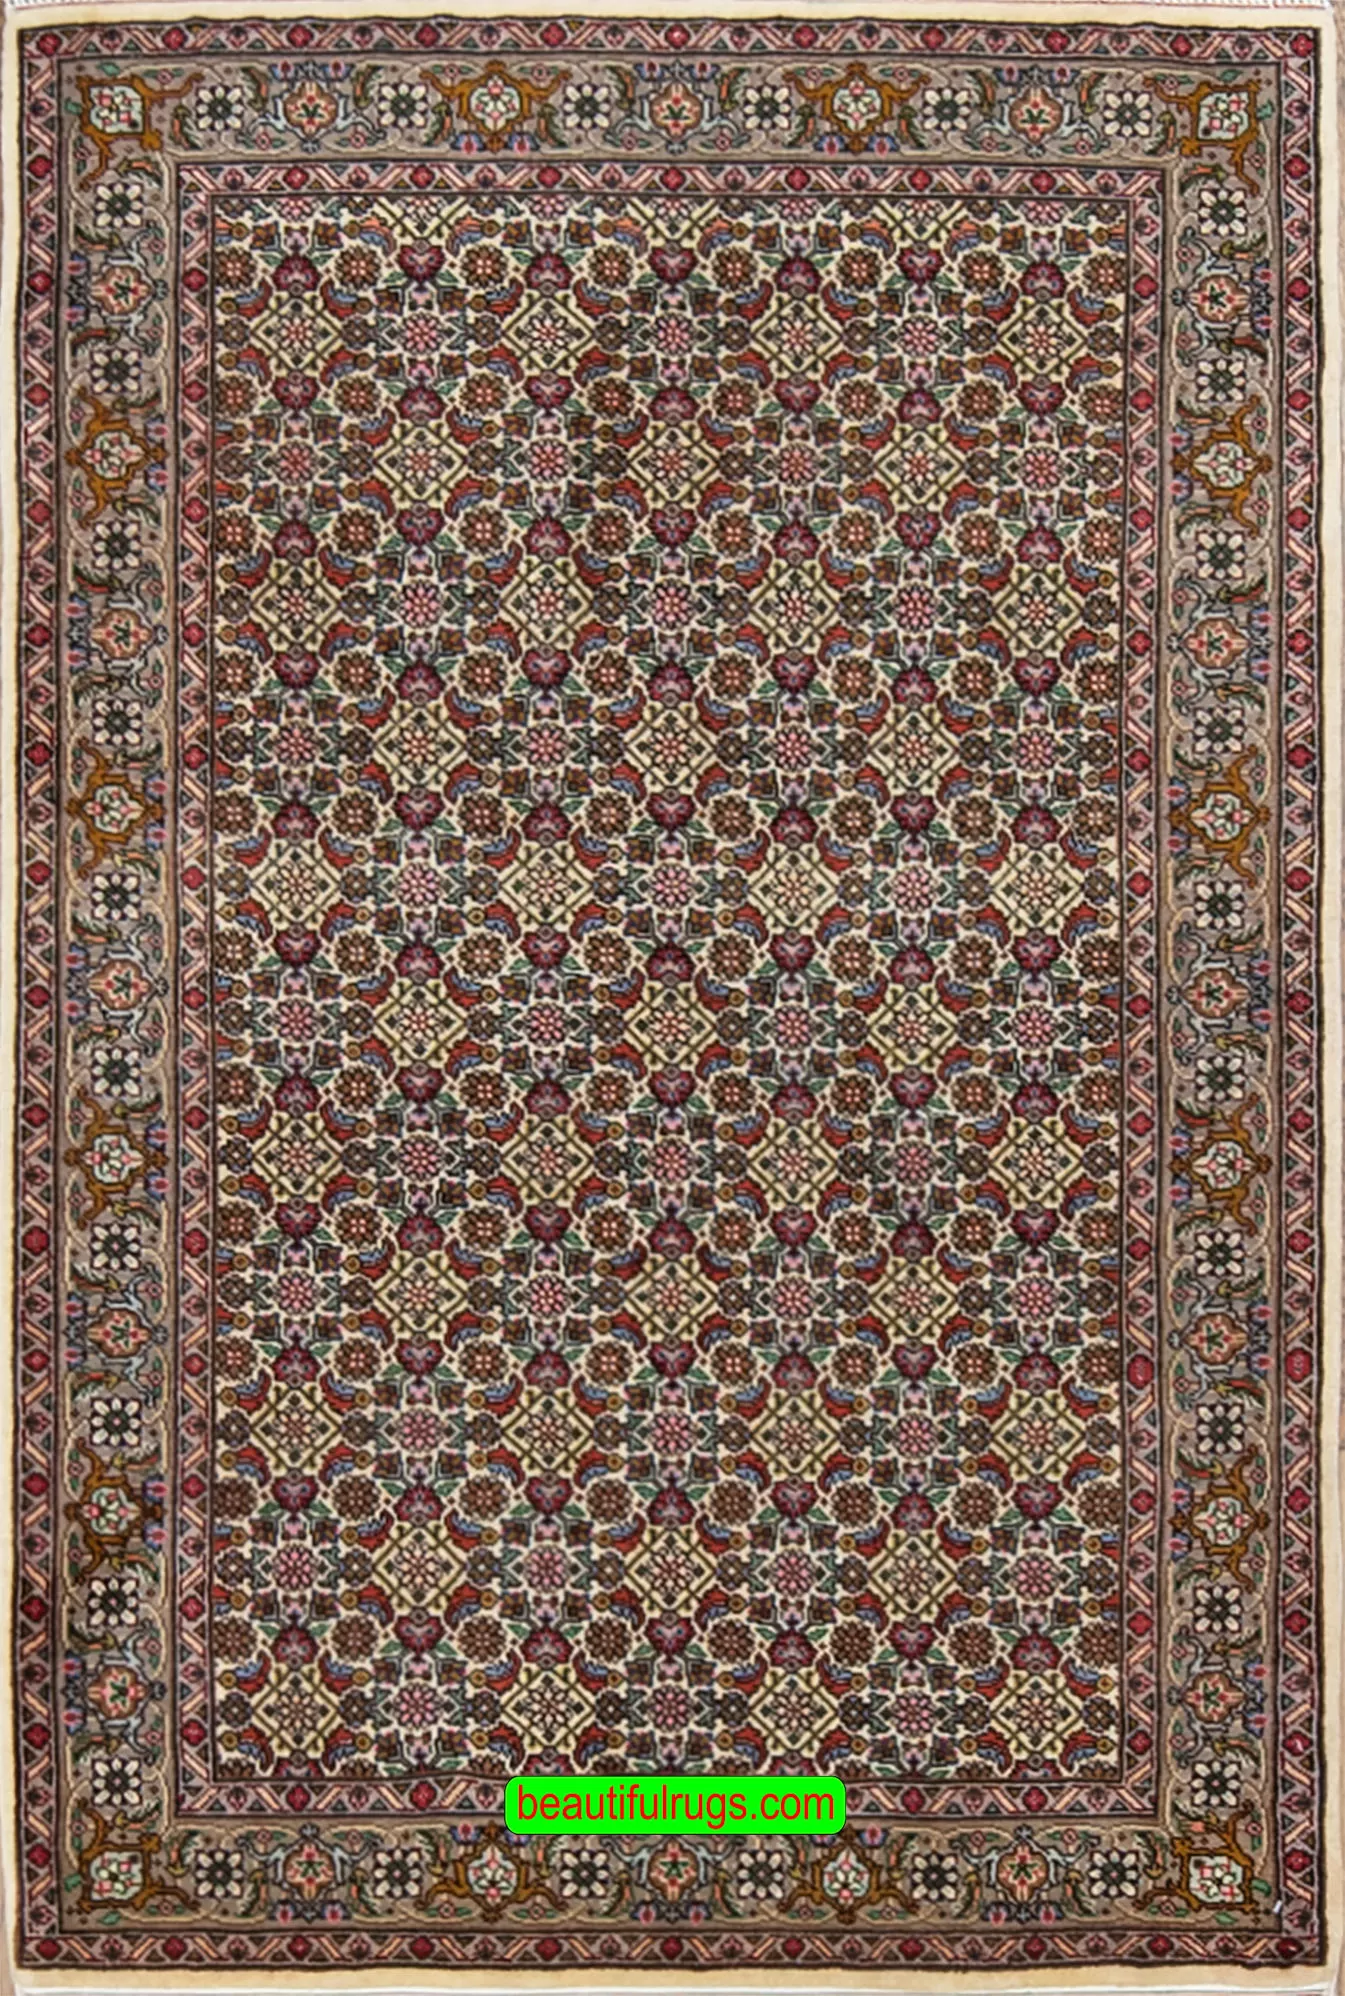 Handmade Persian area rug made of wool, multi color with pastel beige color in the main field and all-over design. Size 3.3x5.